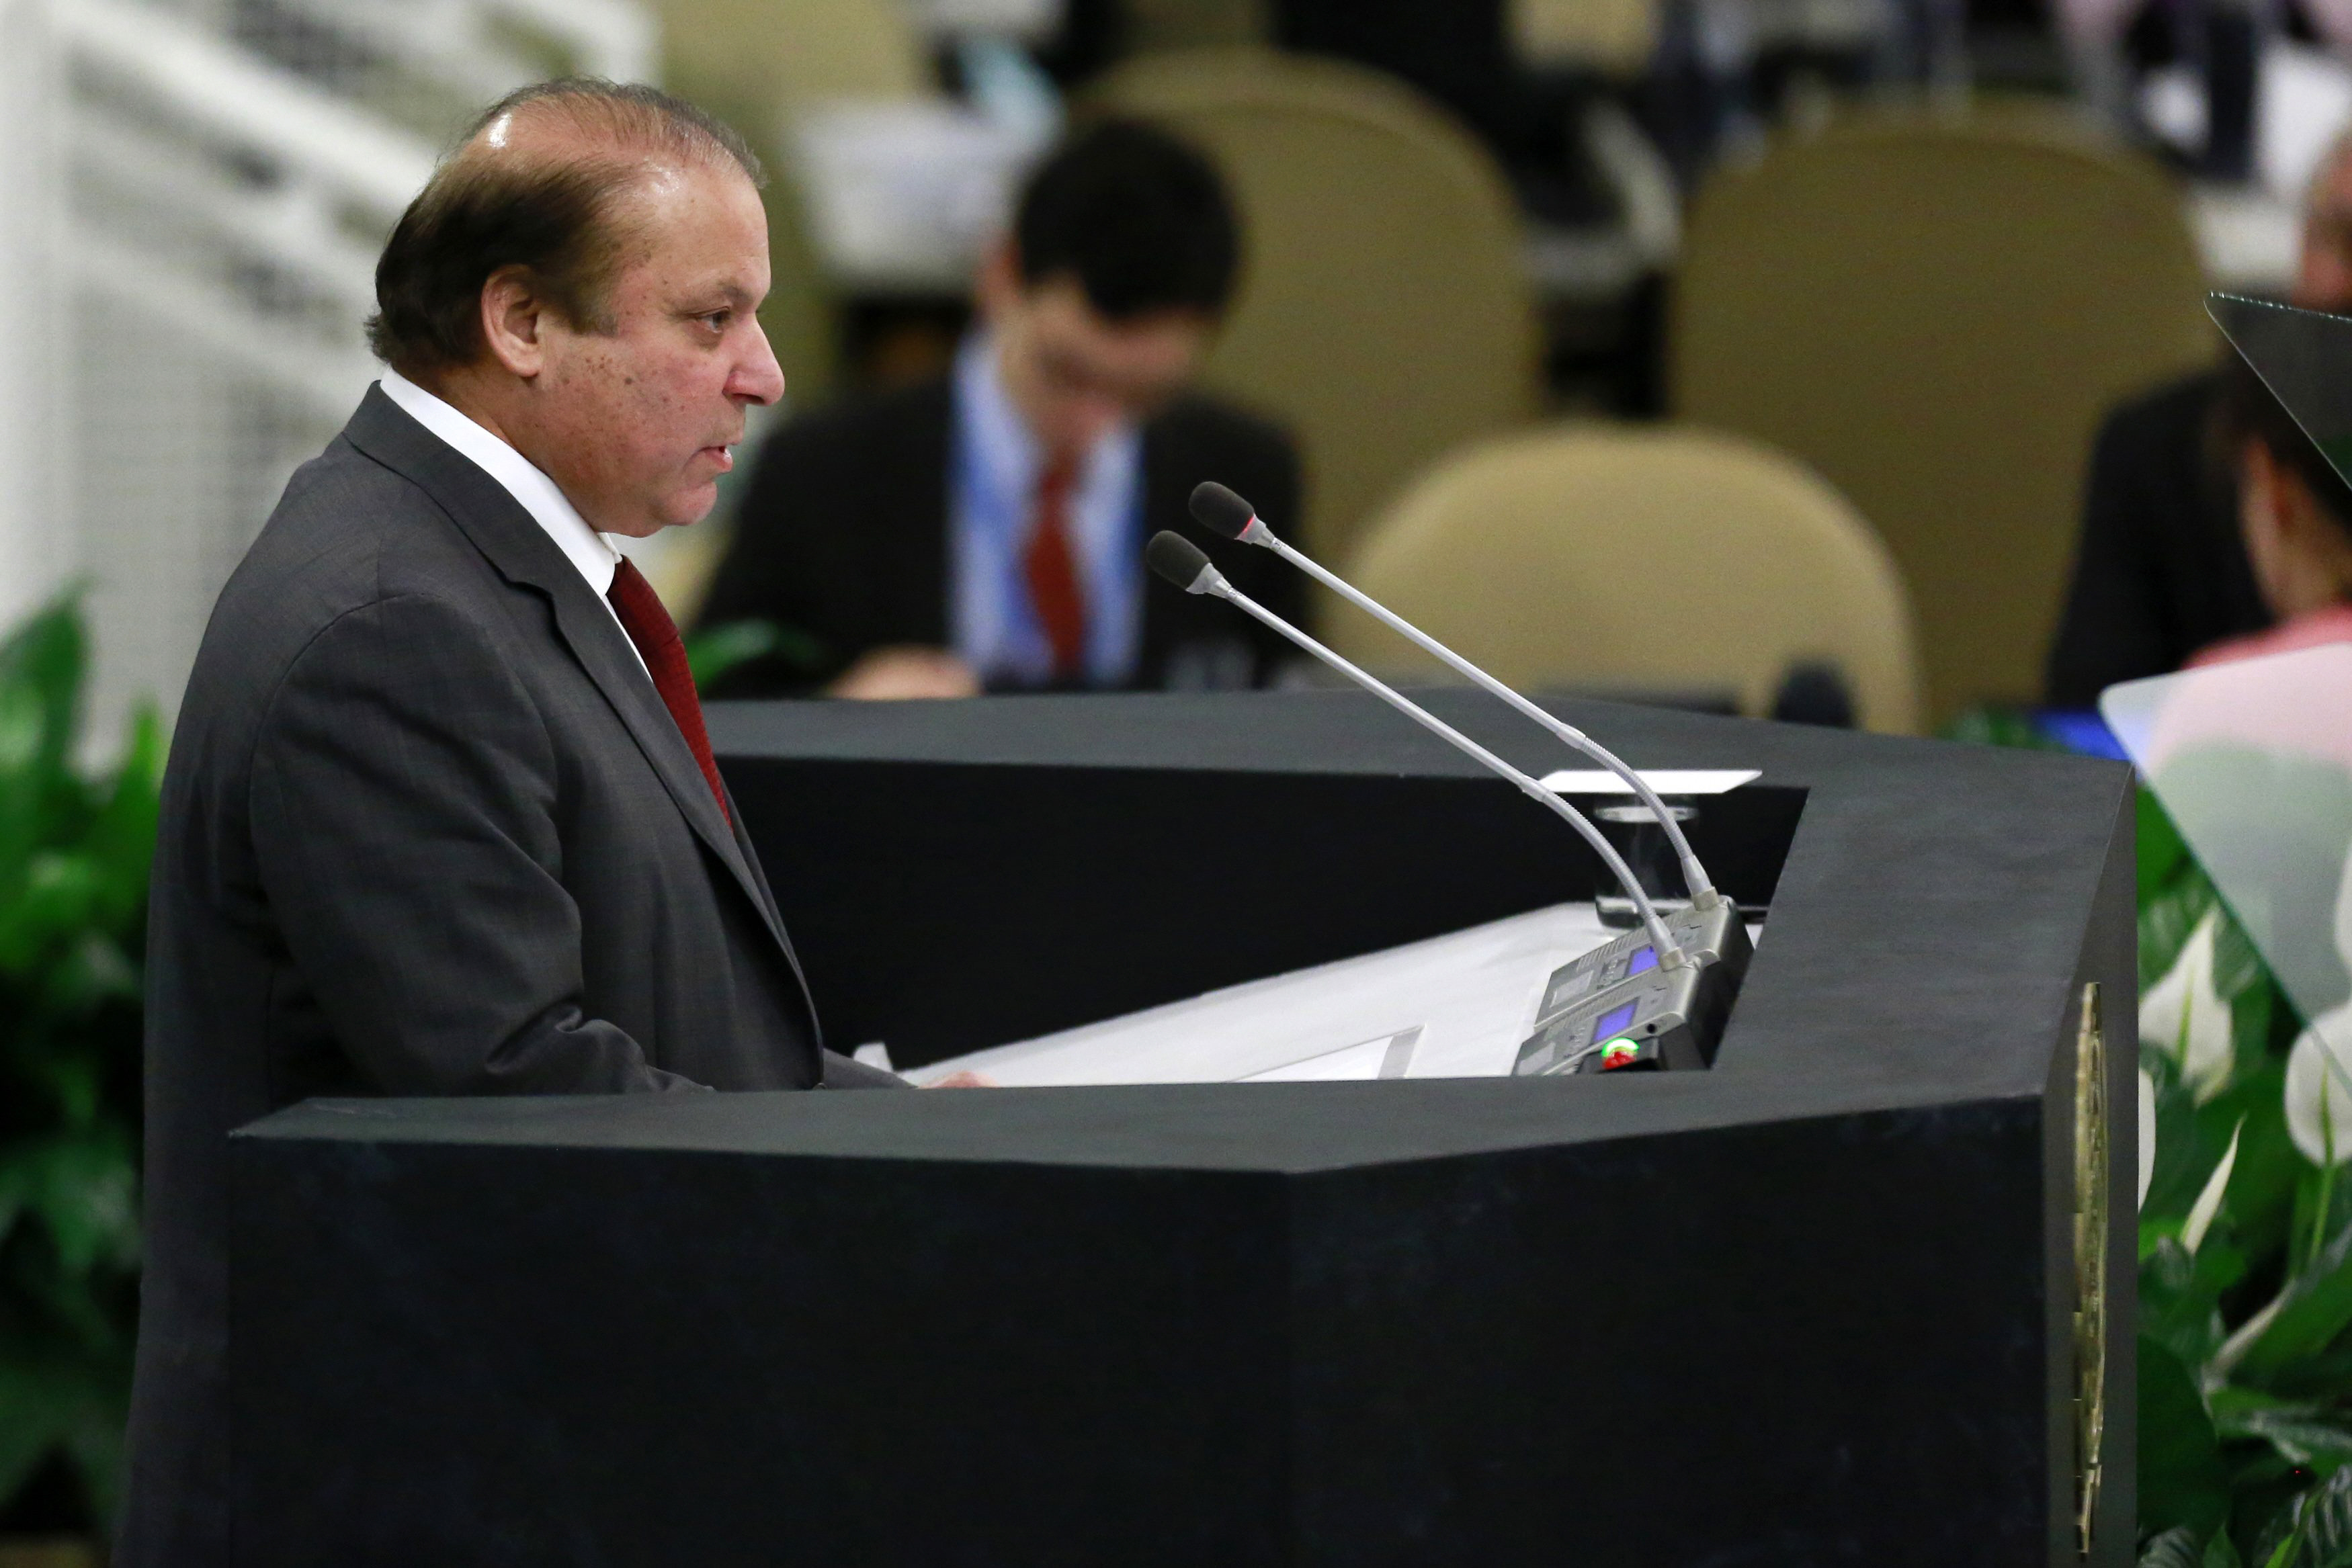 quot we stand ready to re engage with india in a substantive and purposeful dialogue quot said nawaz sharif photo reuters